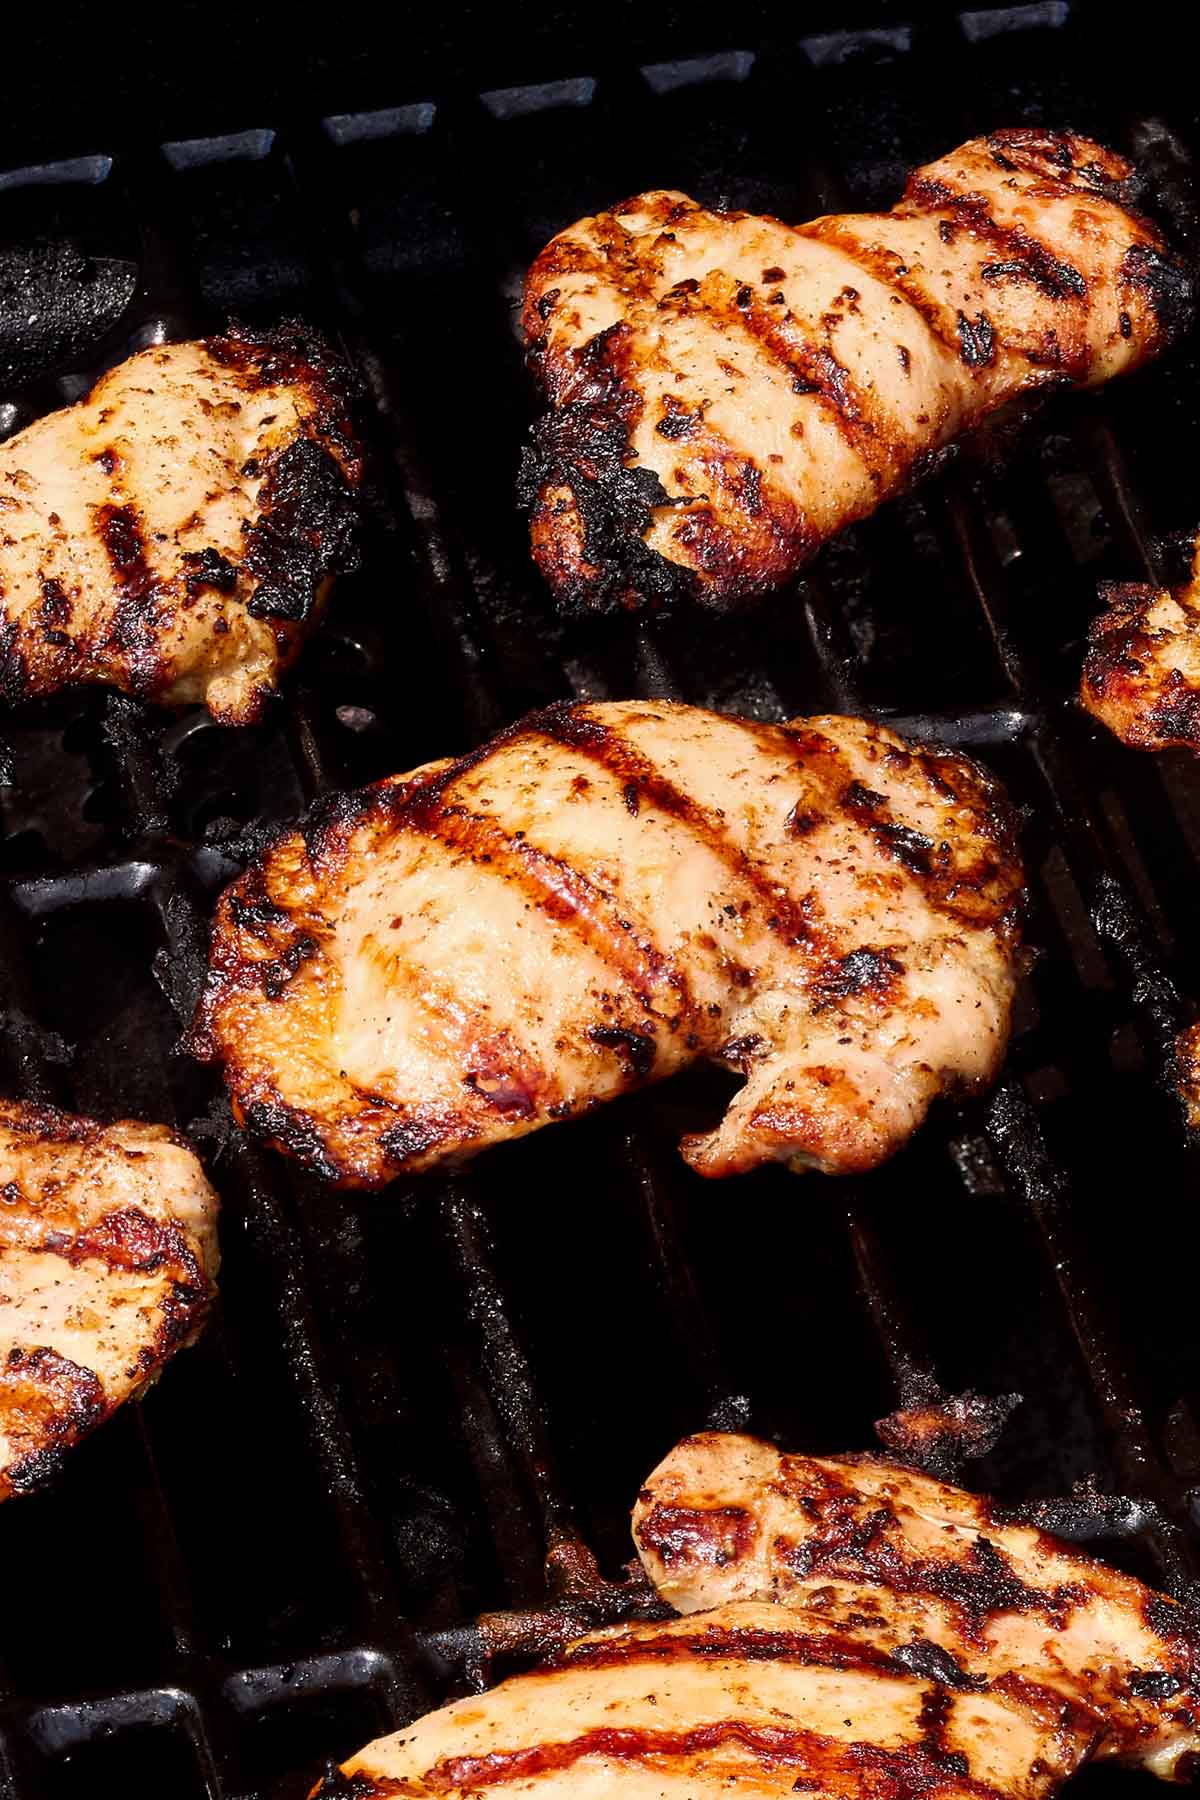 Chicken thighs being grilled on an outdoor grill.